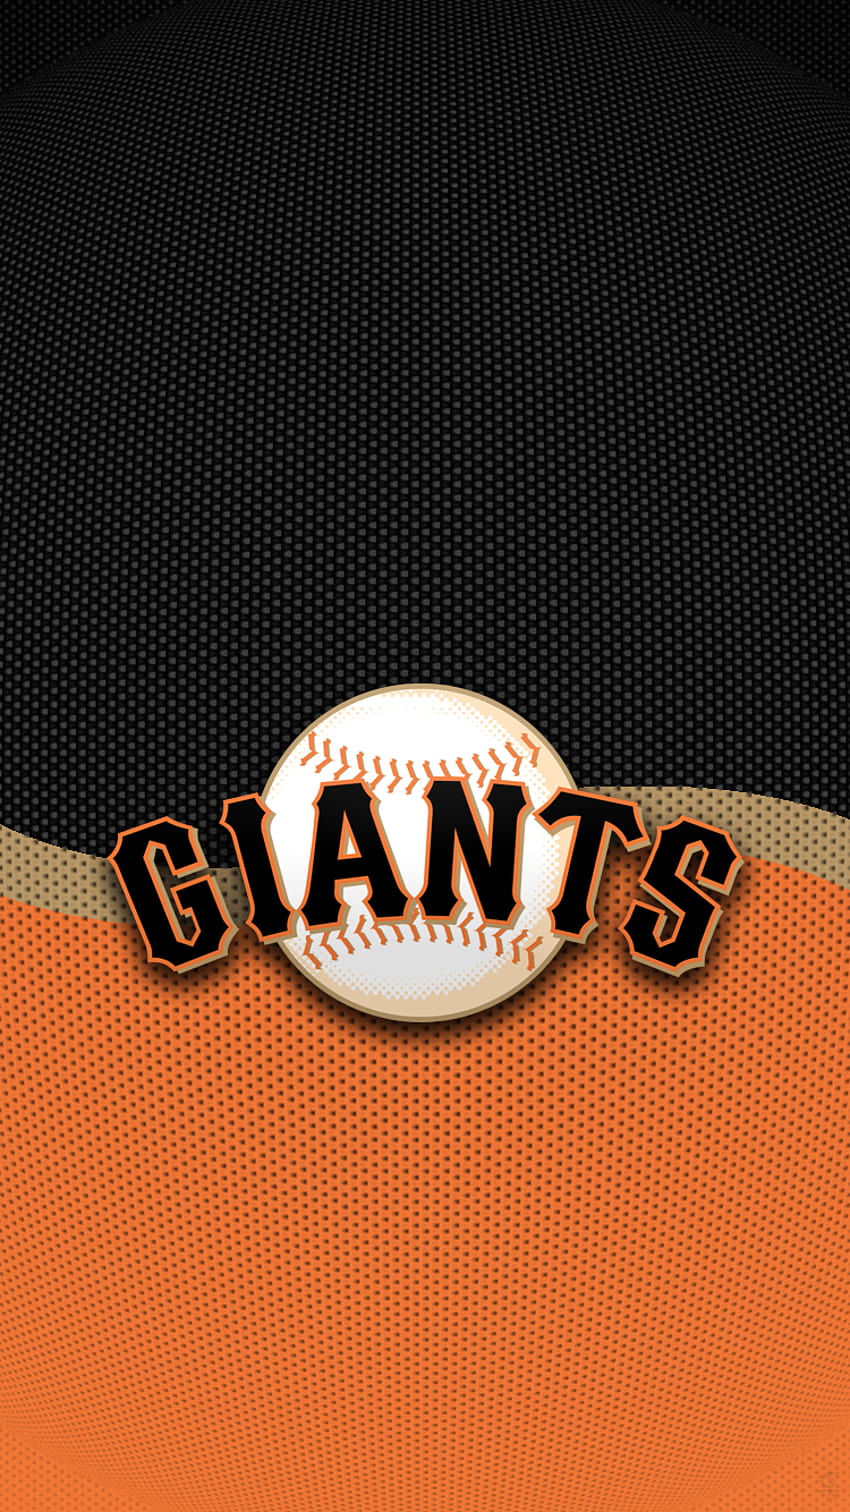 Mobile wallpaper San Francisco Giants Baseball Sports 311384 download  the picture for free